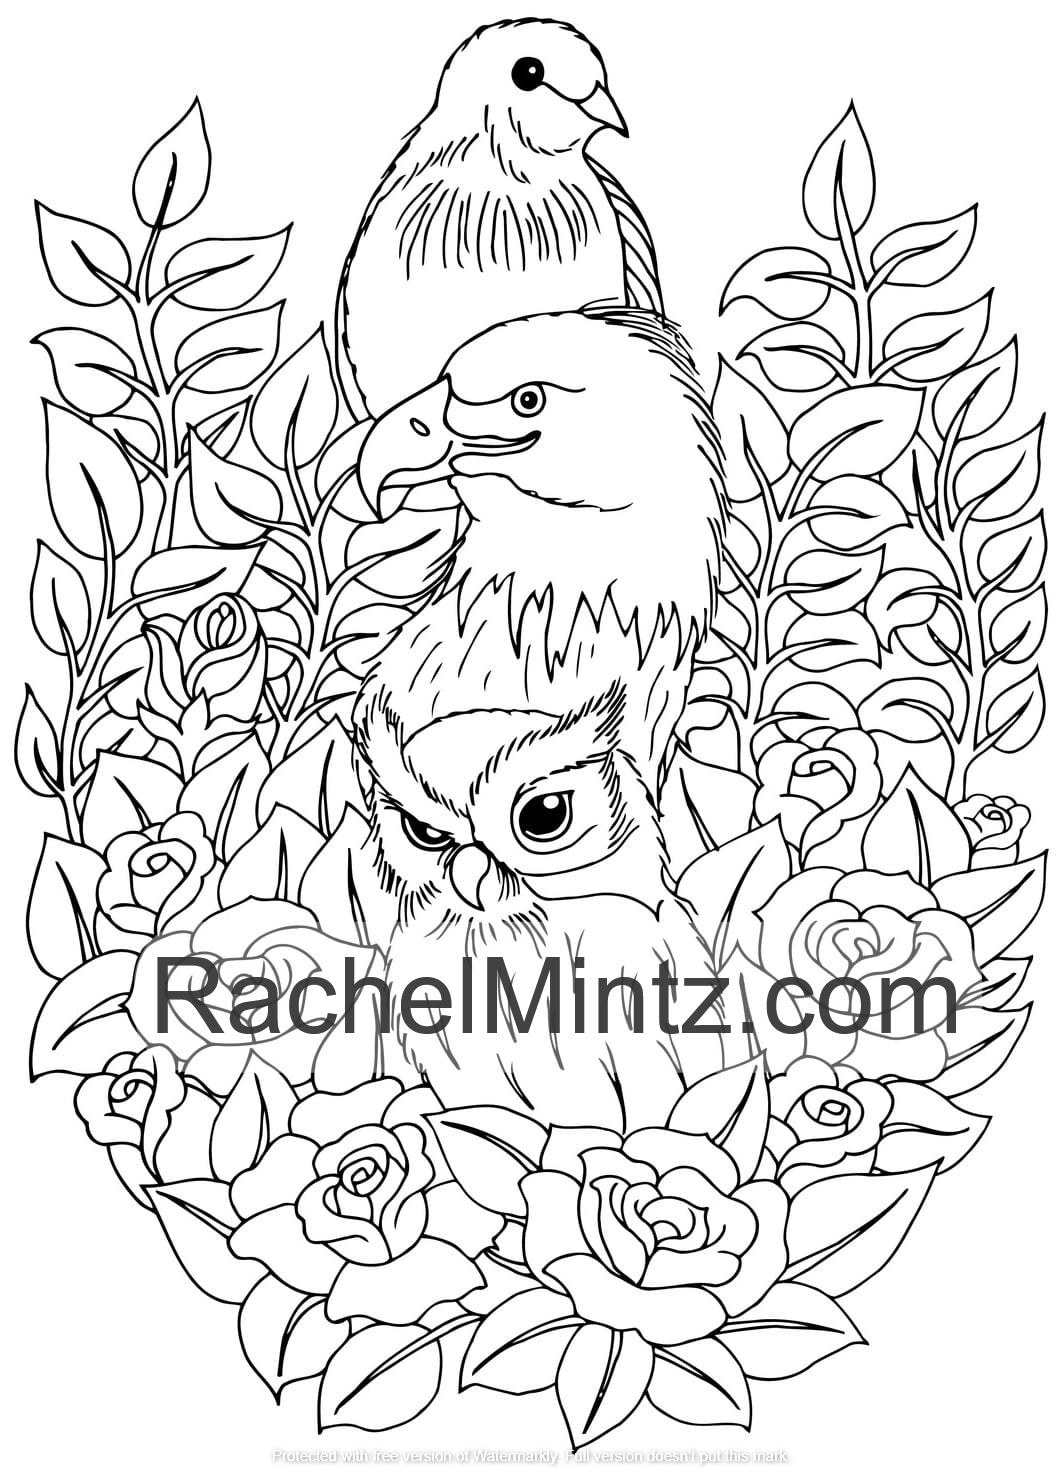 Cuddles & Hugs - Lovely Optimistic Floral Scenes Fairies and Animals, Printable Coloring Book